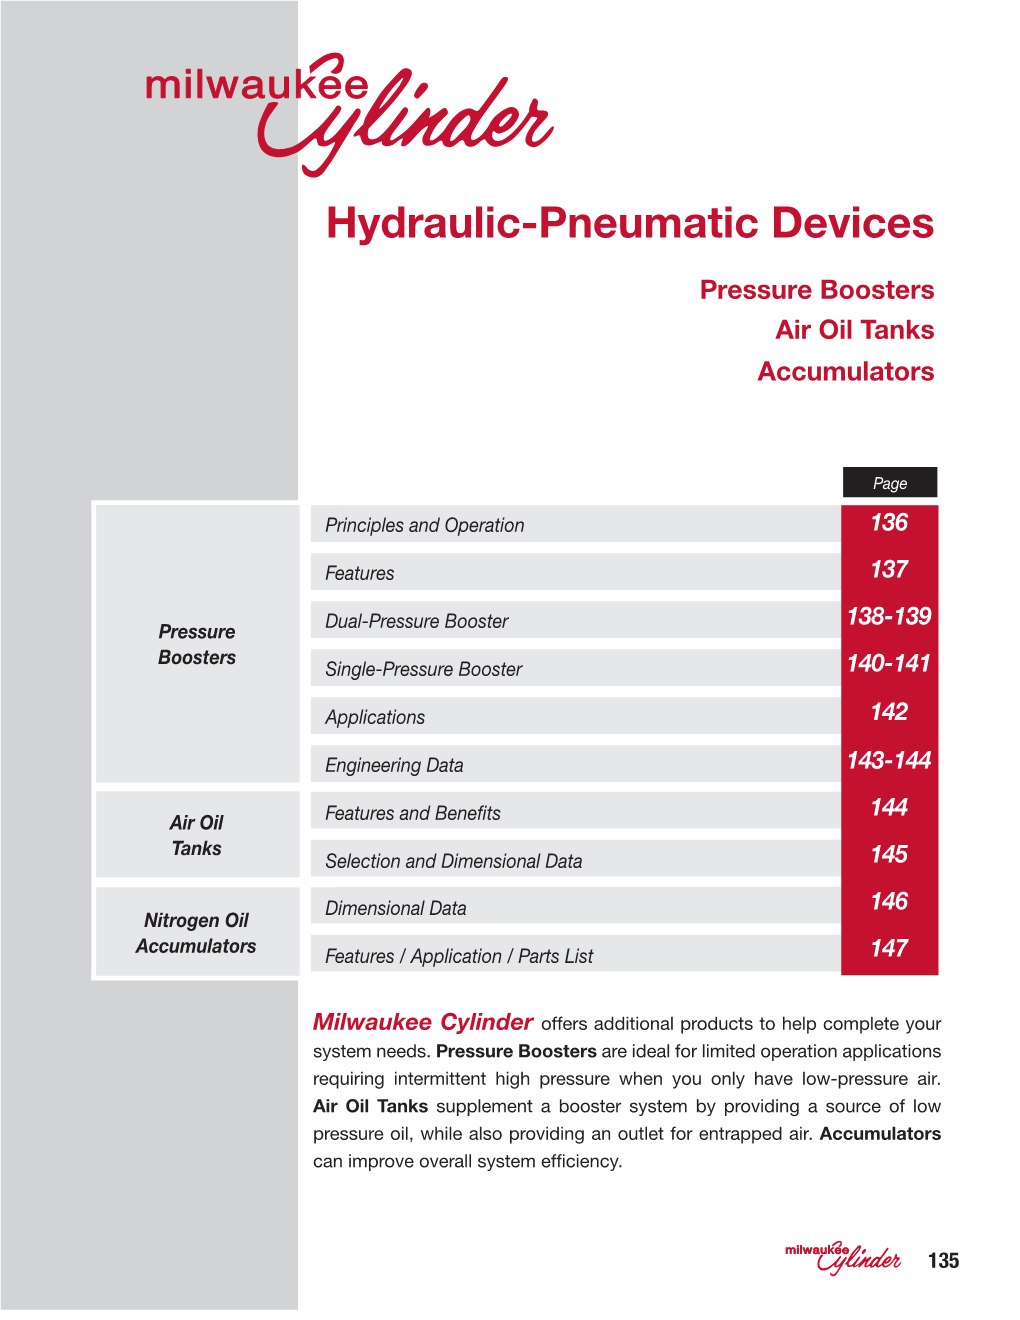 Hydraulic-Pneumatic Devices